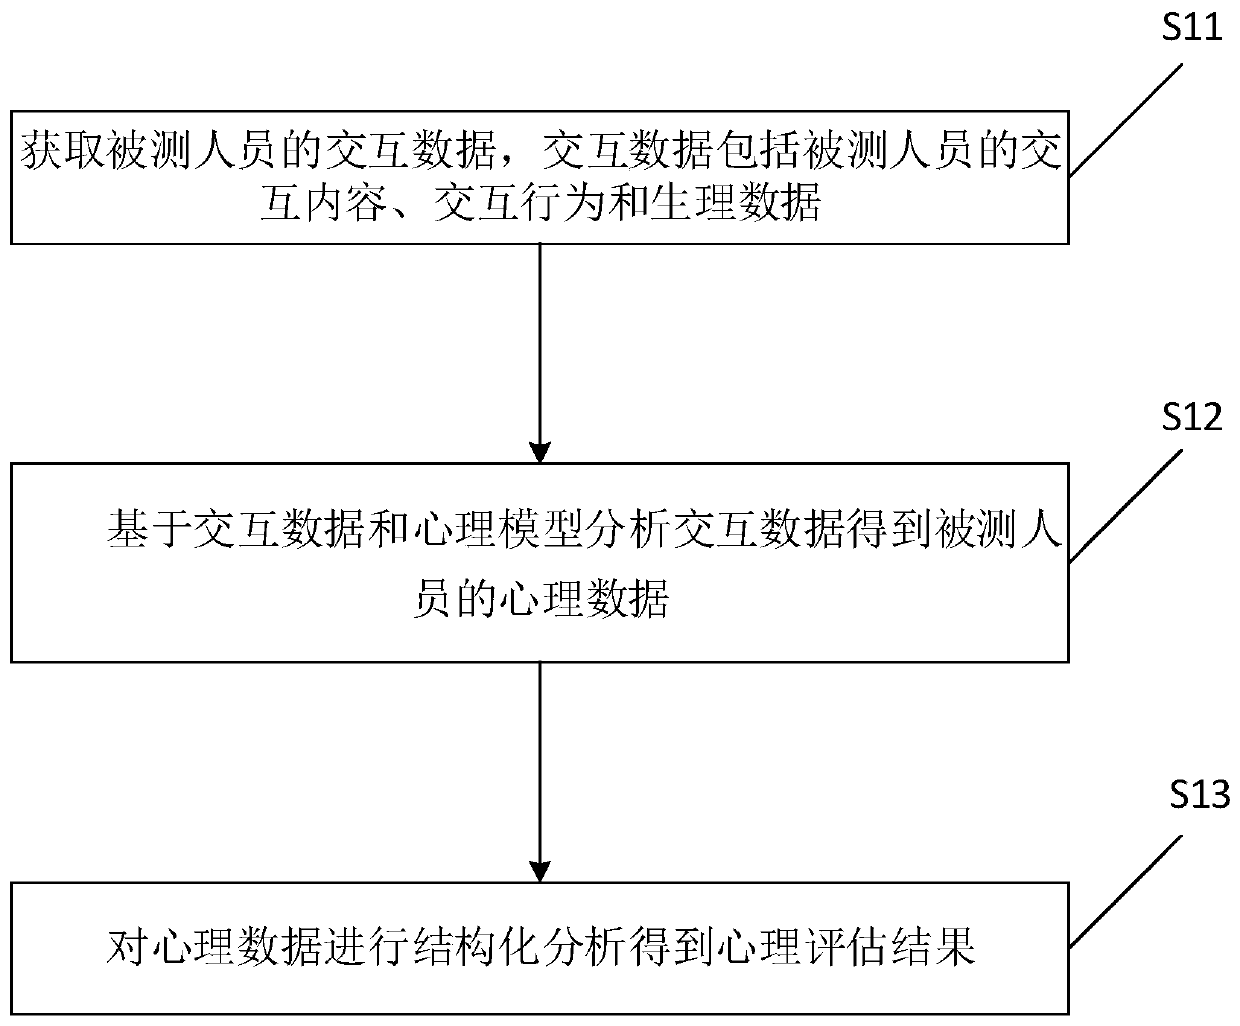 Psychological assessment method based on human-machine interaction and electronic equipment